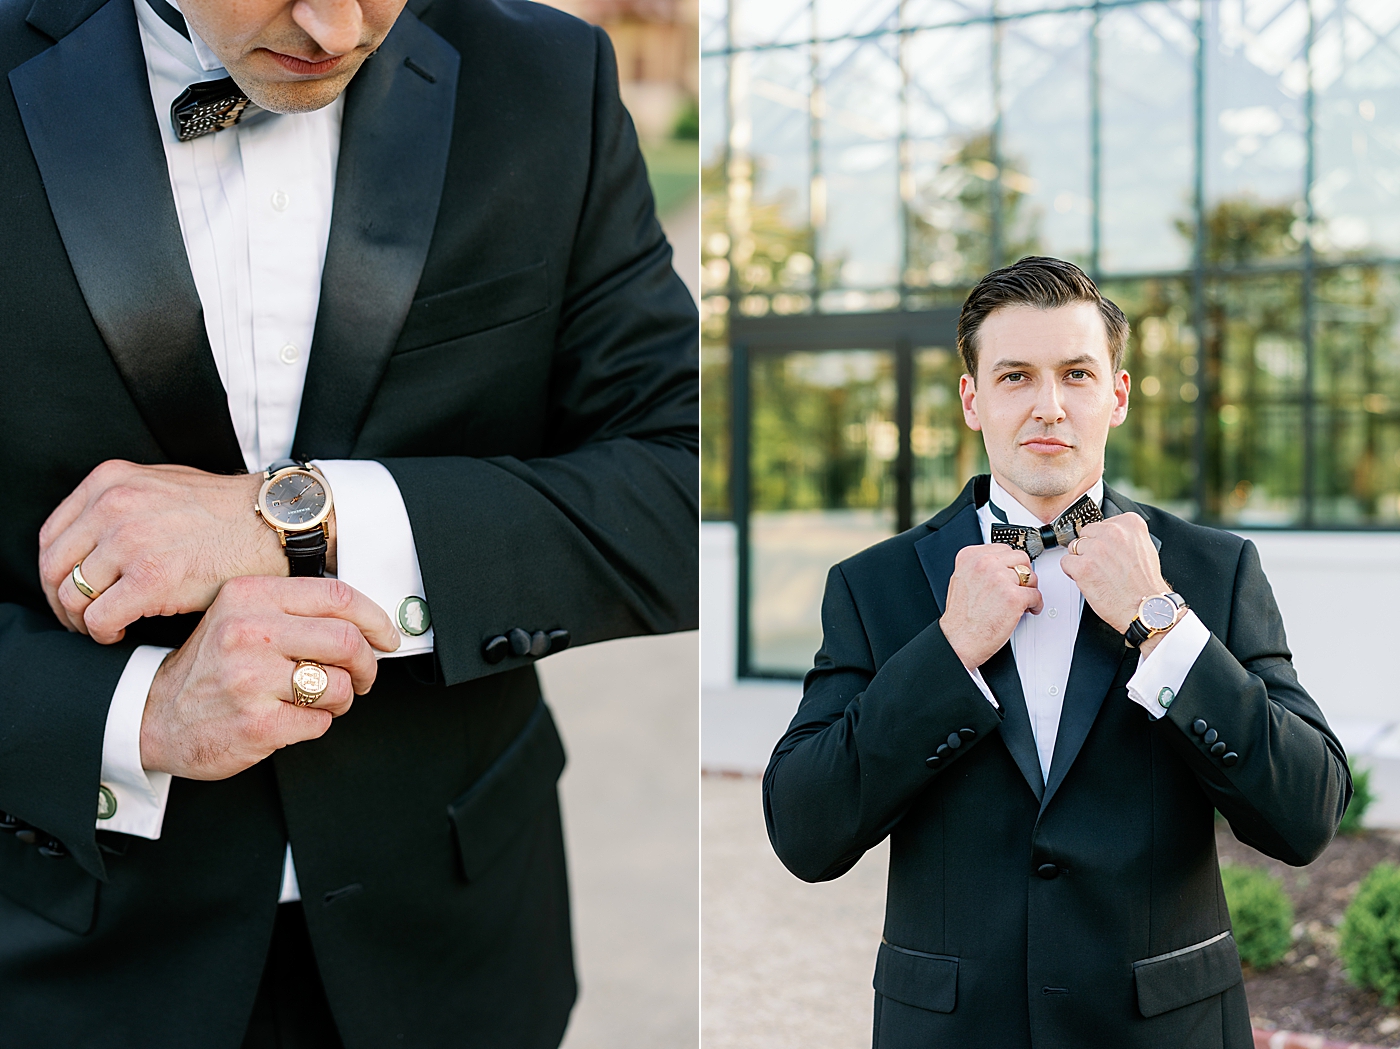 Groom getting ready before wedding at Boyd Foundation Horticultural Center | Photo by Annie Laura Photo